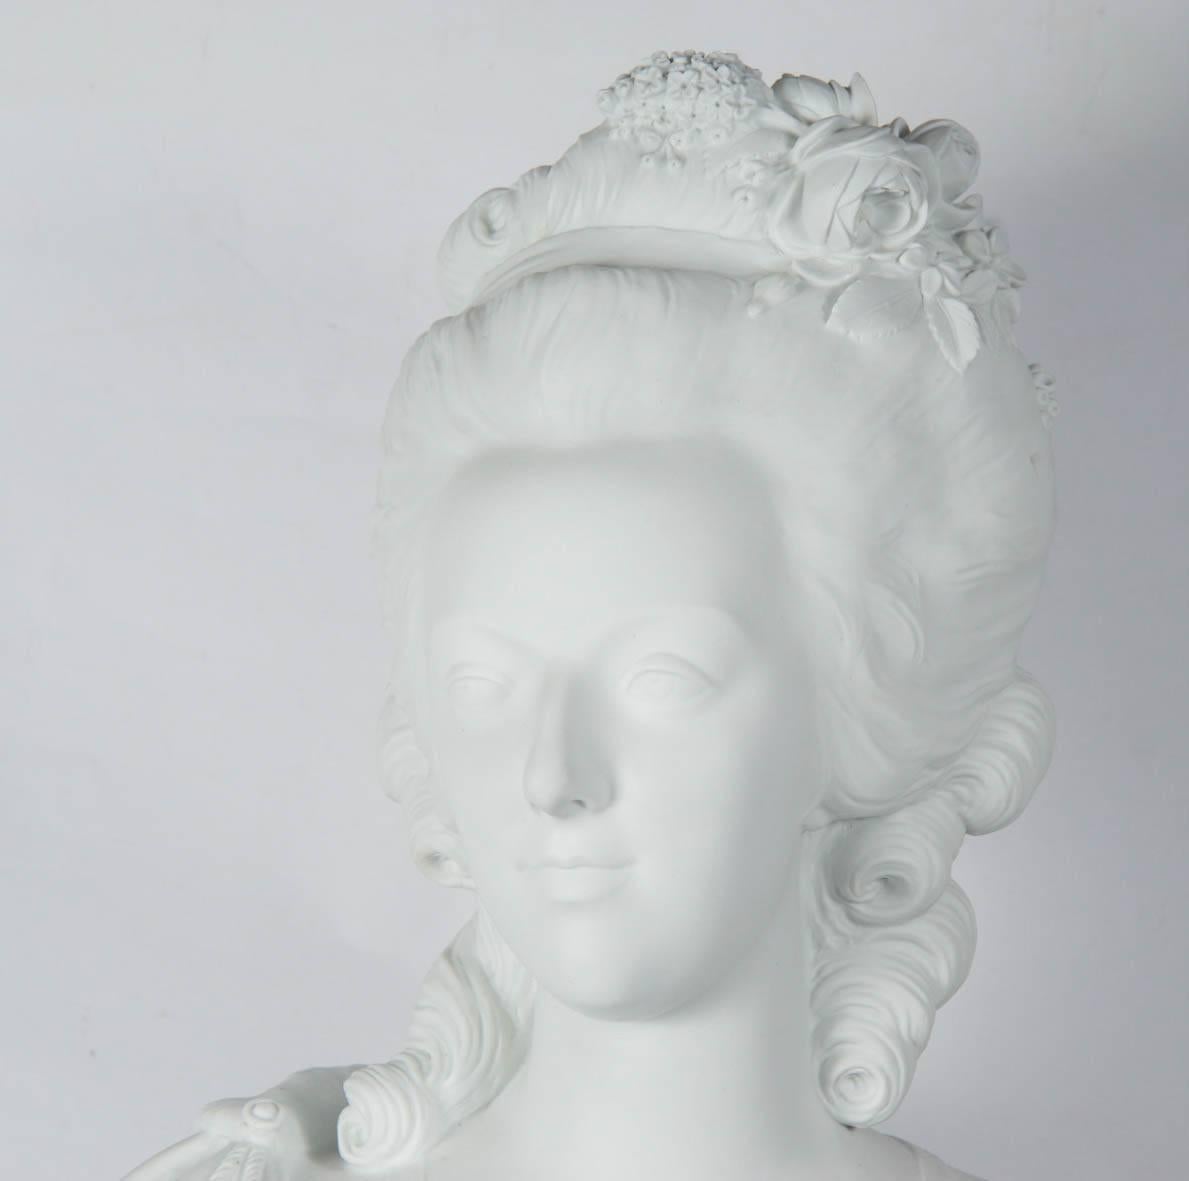 Bust of Marie Antoinette, circa 1860, bisquit of manufacture of Sèvres standing on a gilt bronze and marble base
sign JACQUEMIN.